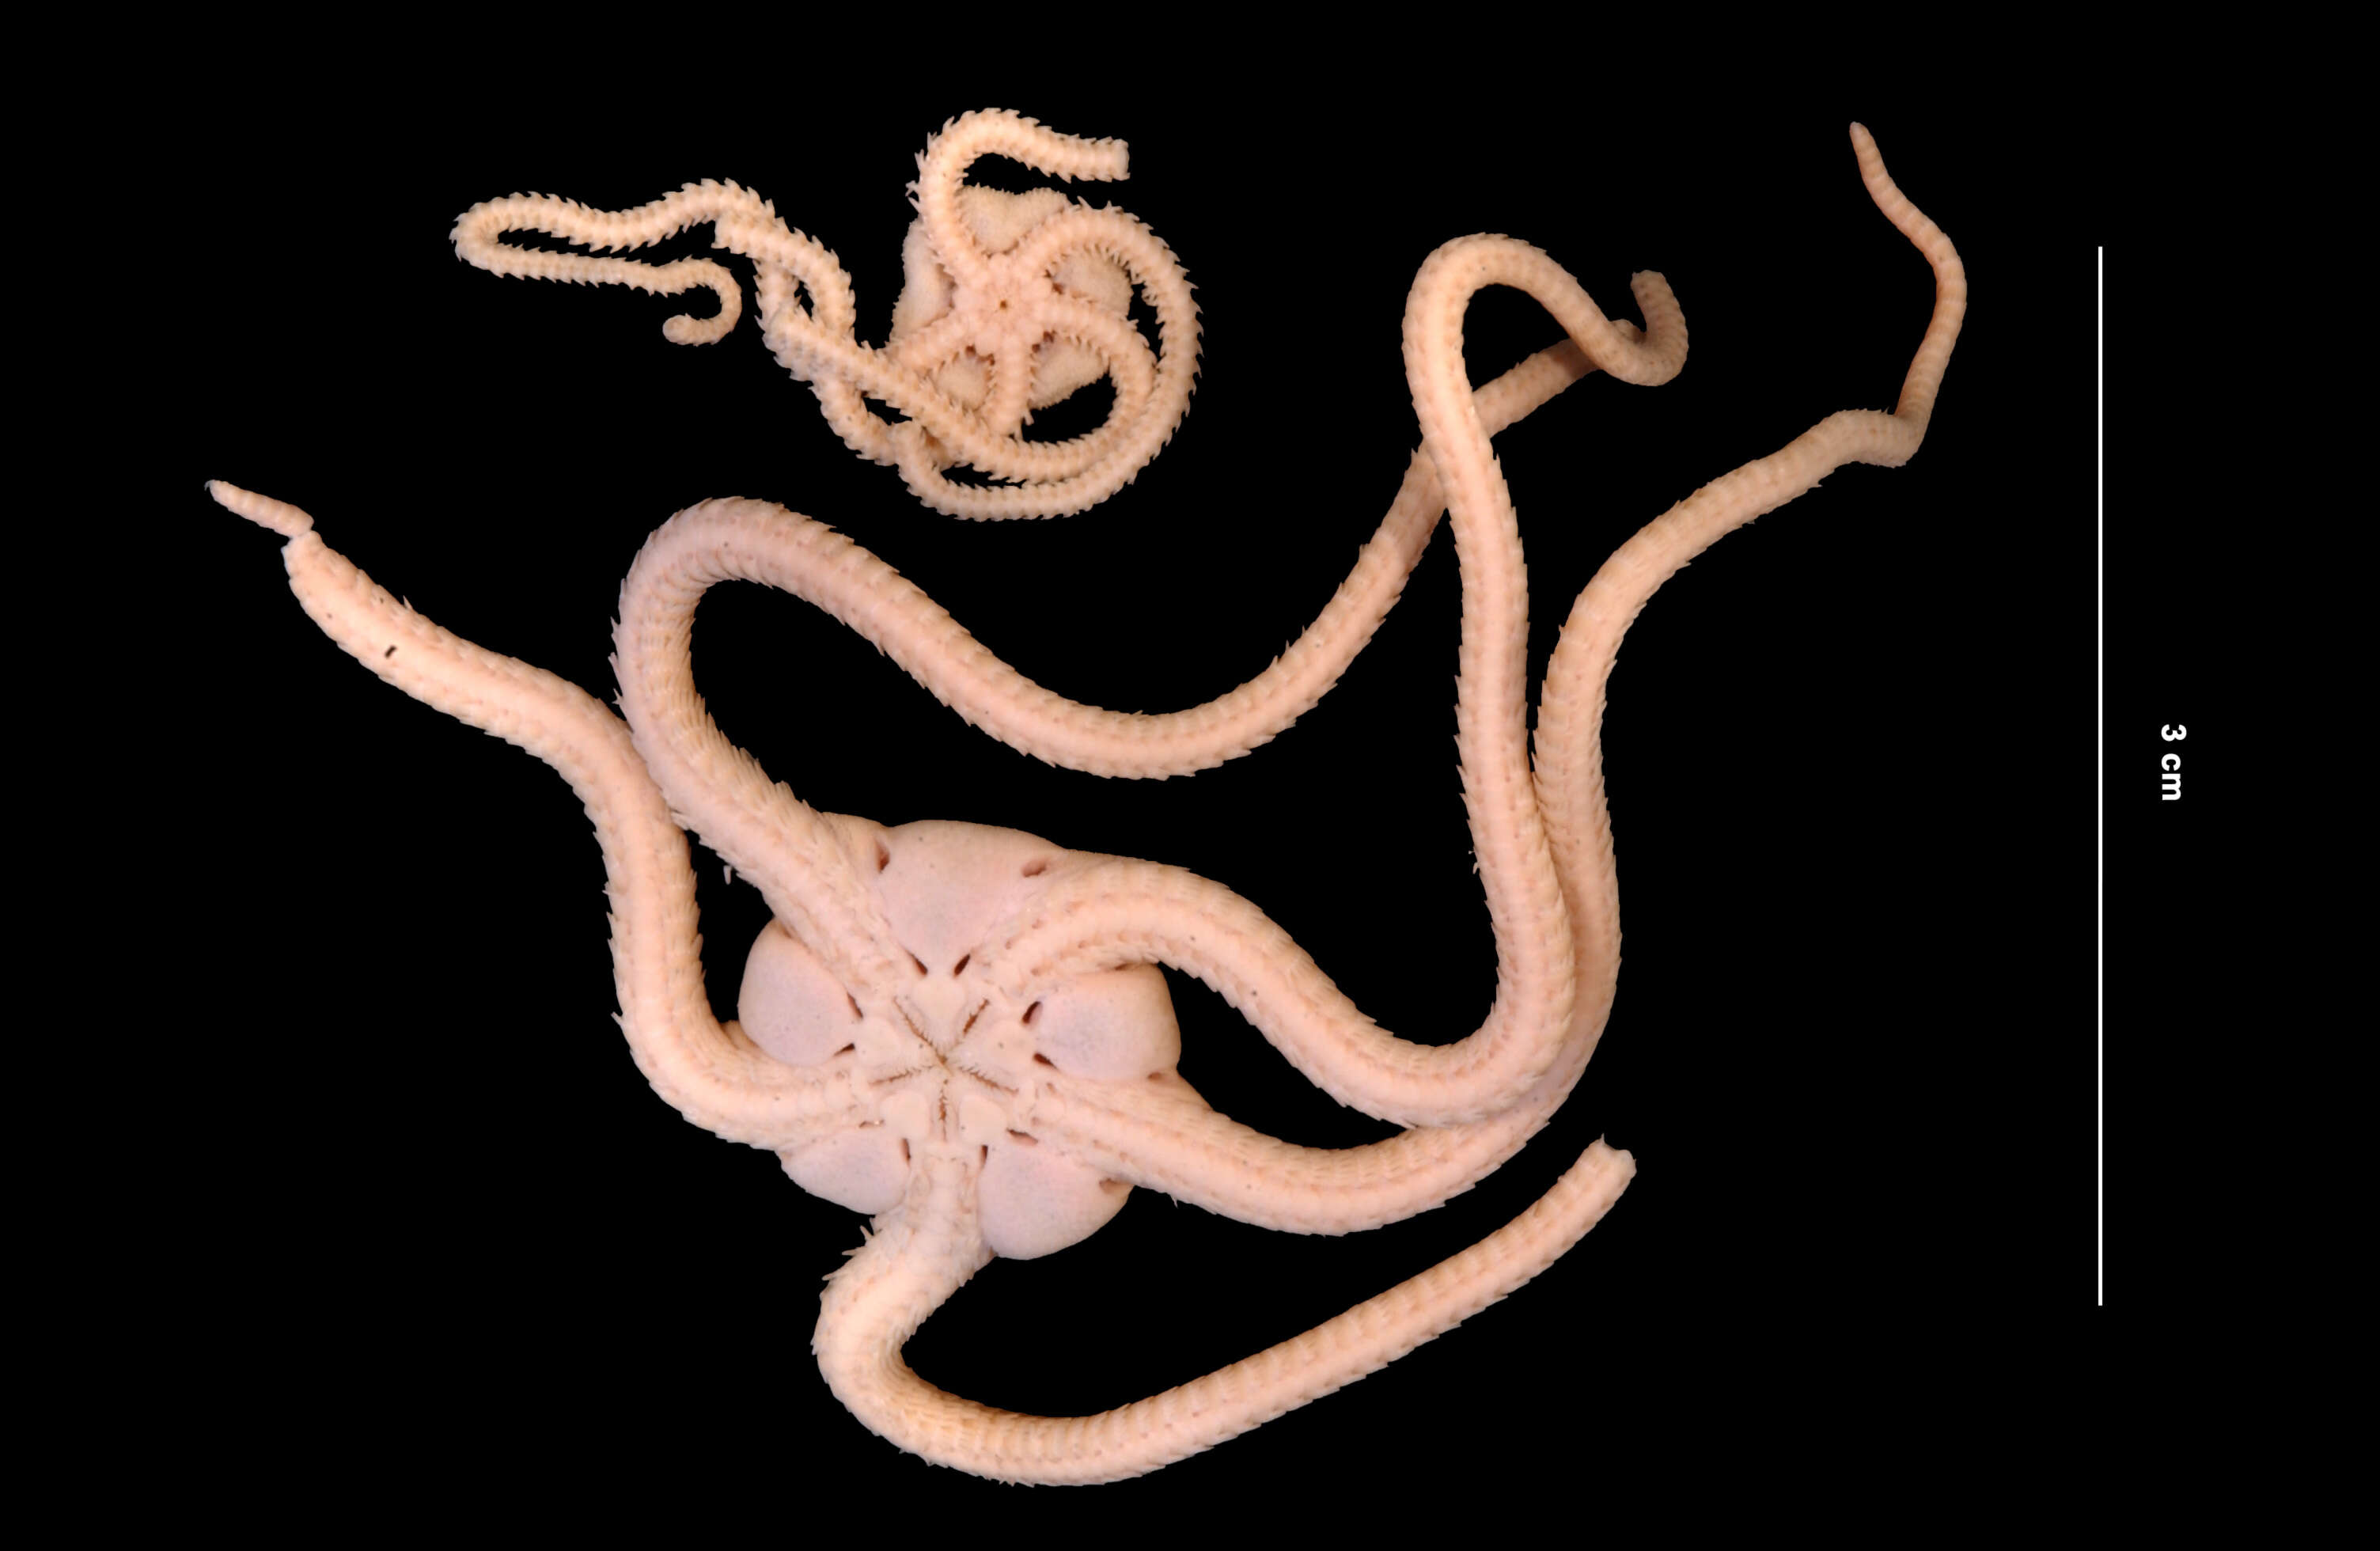 Image of Short-spined brittle star